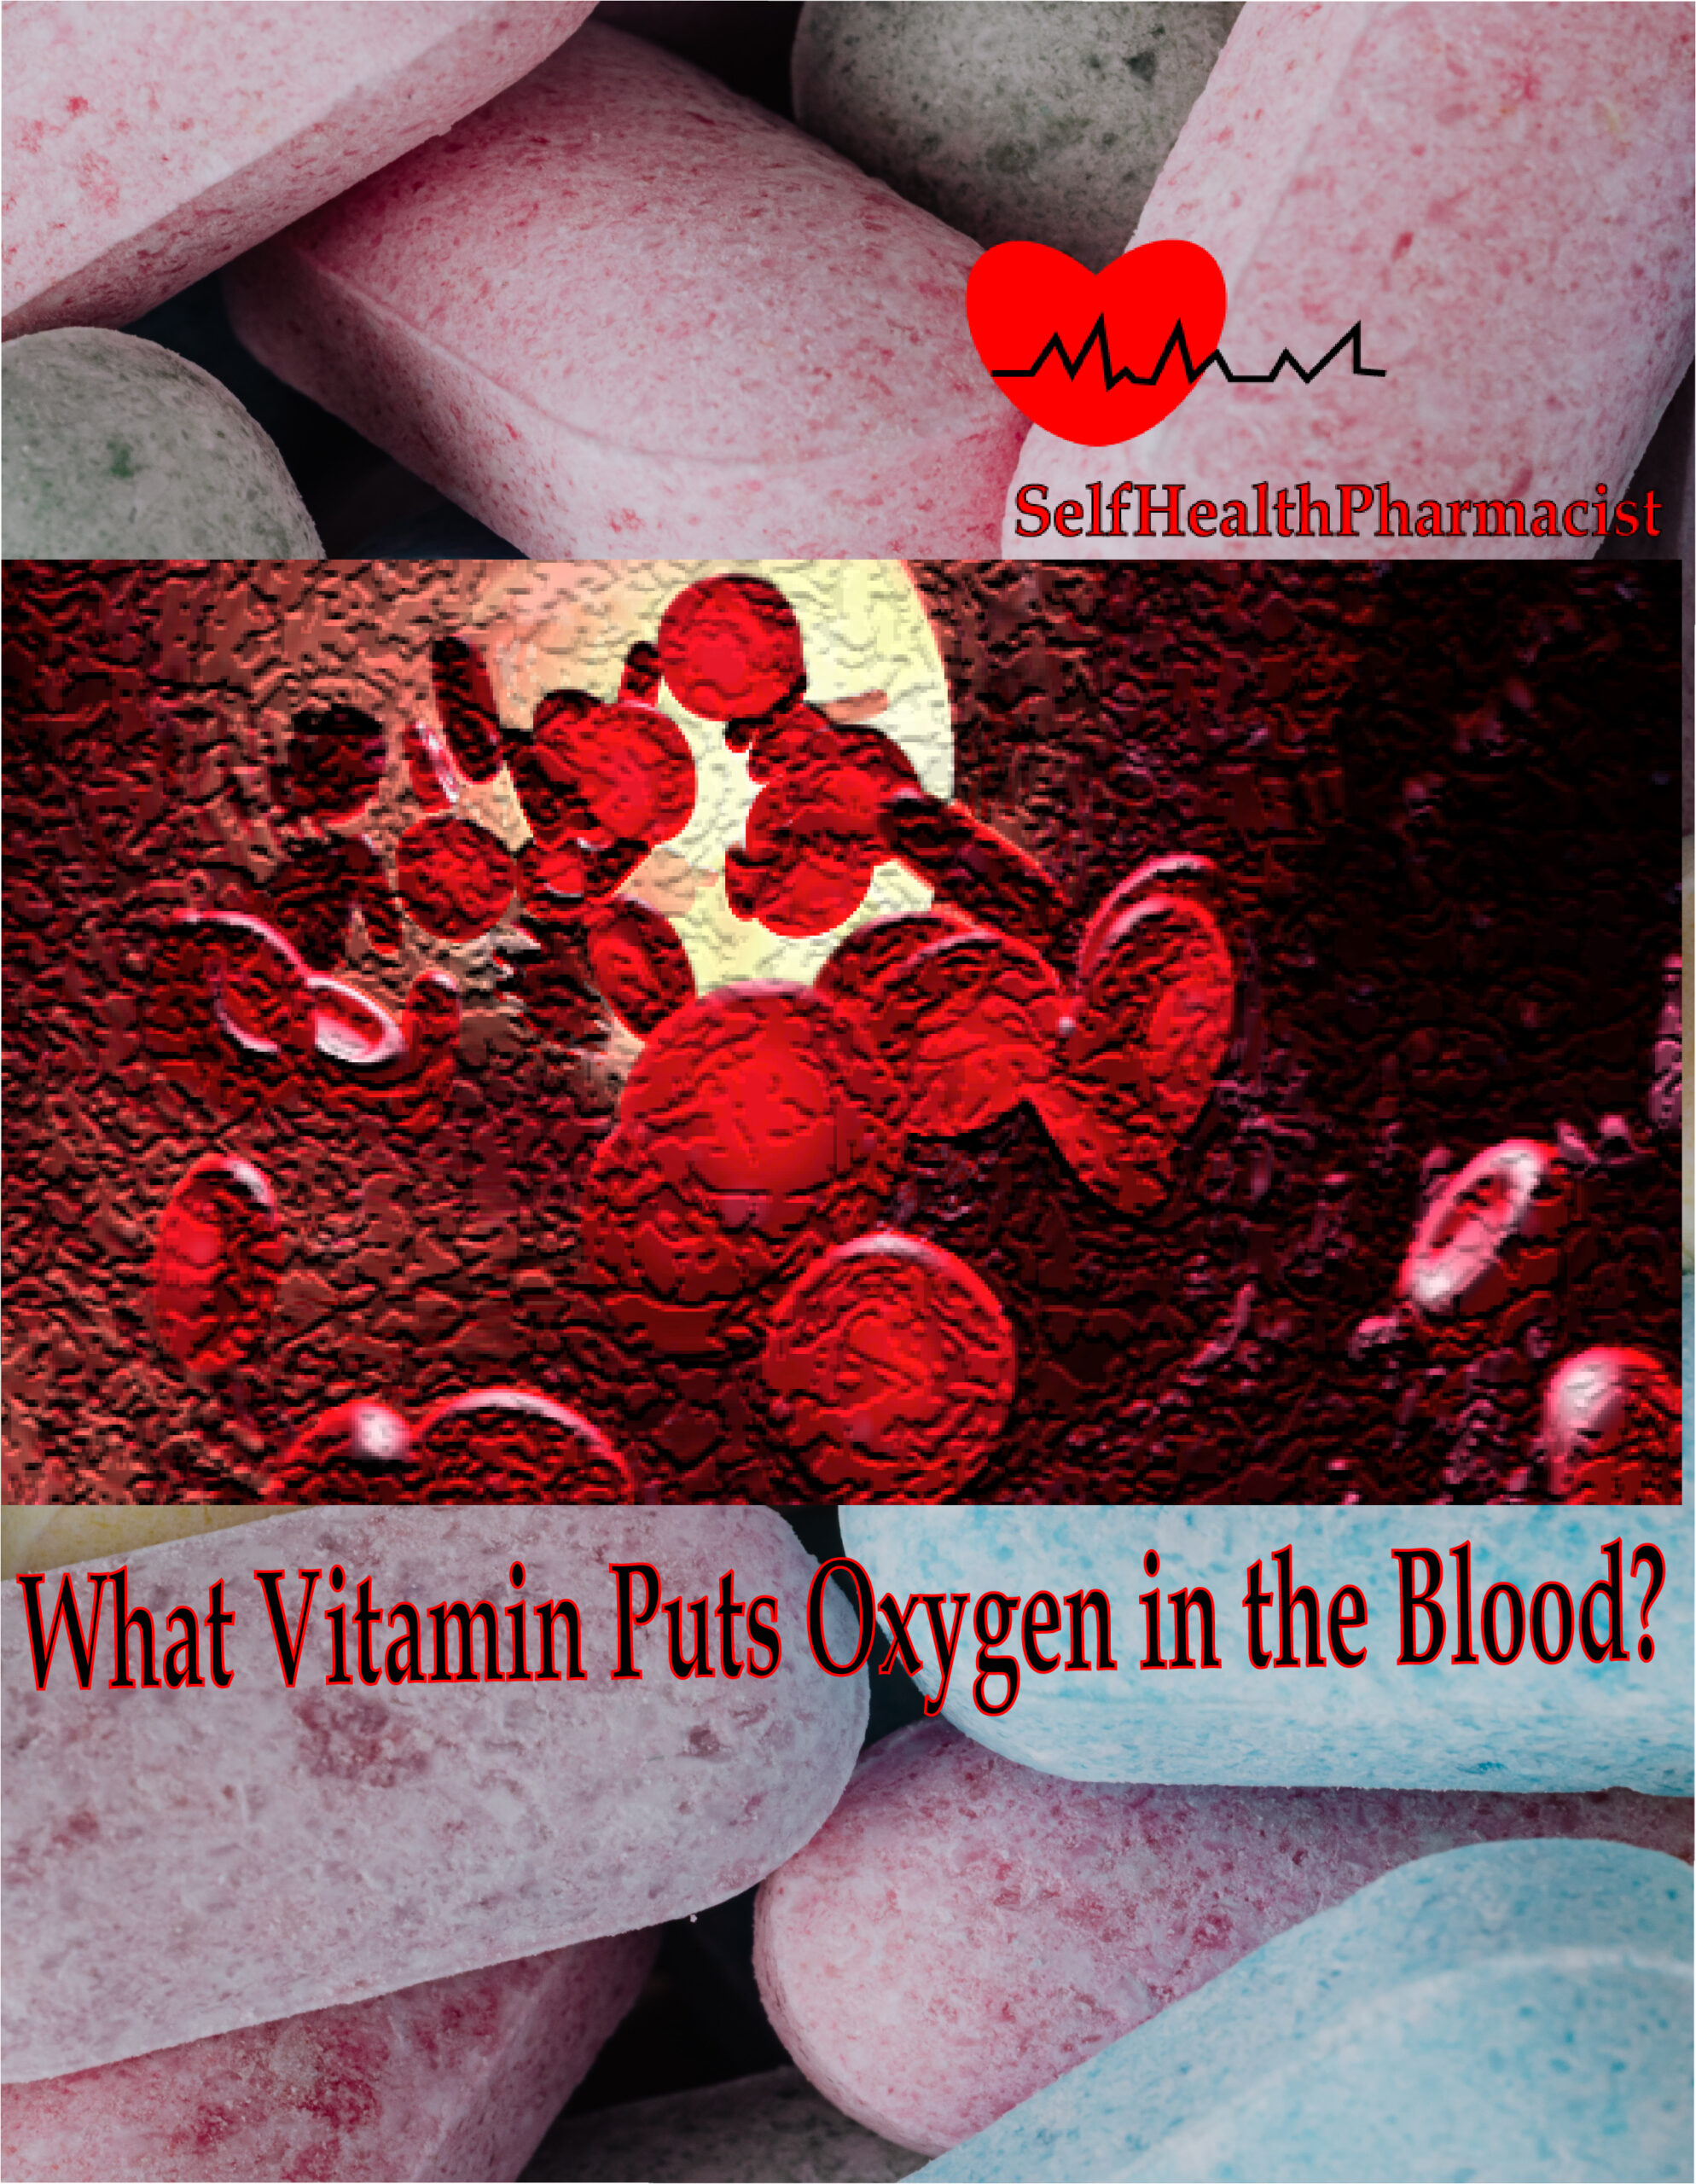 What Vitamin Puts Oxygen in the Blood?